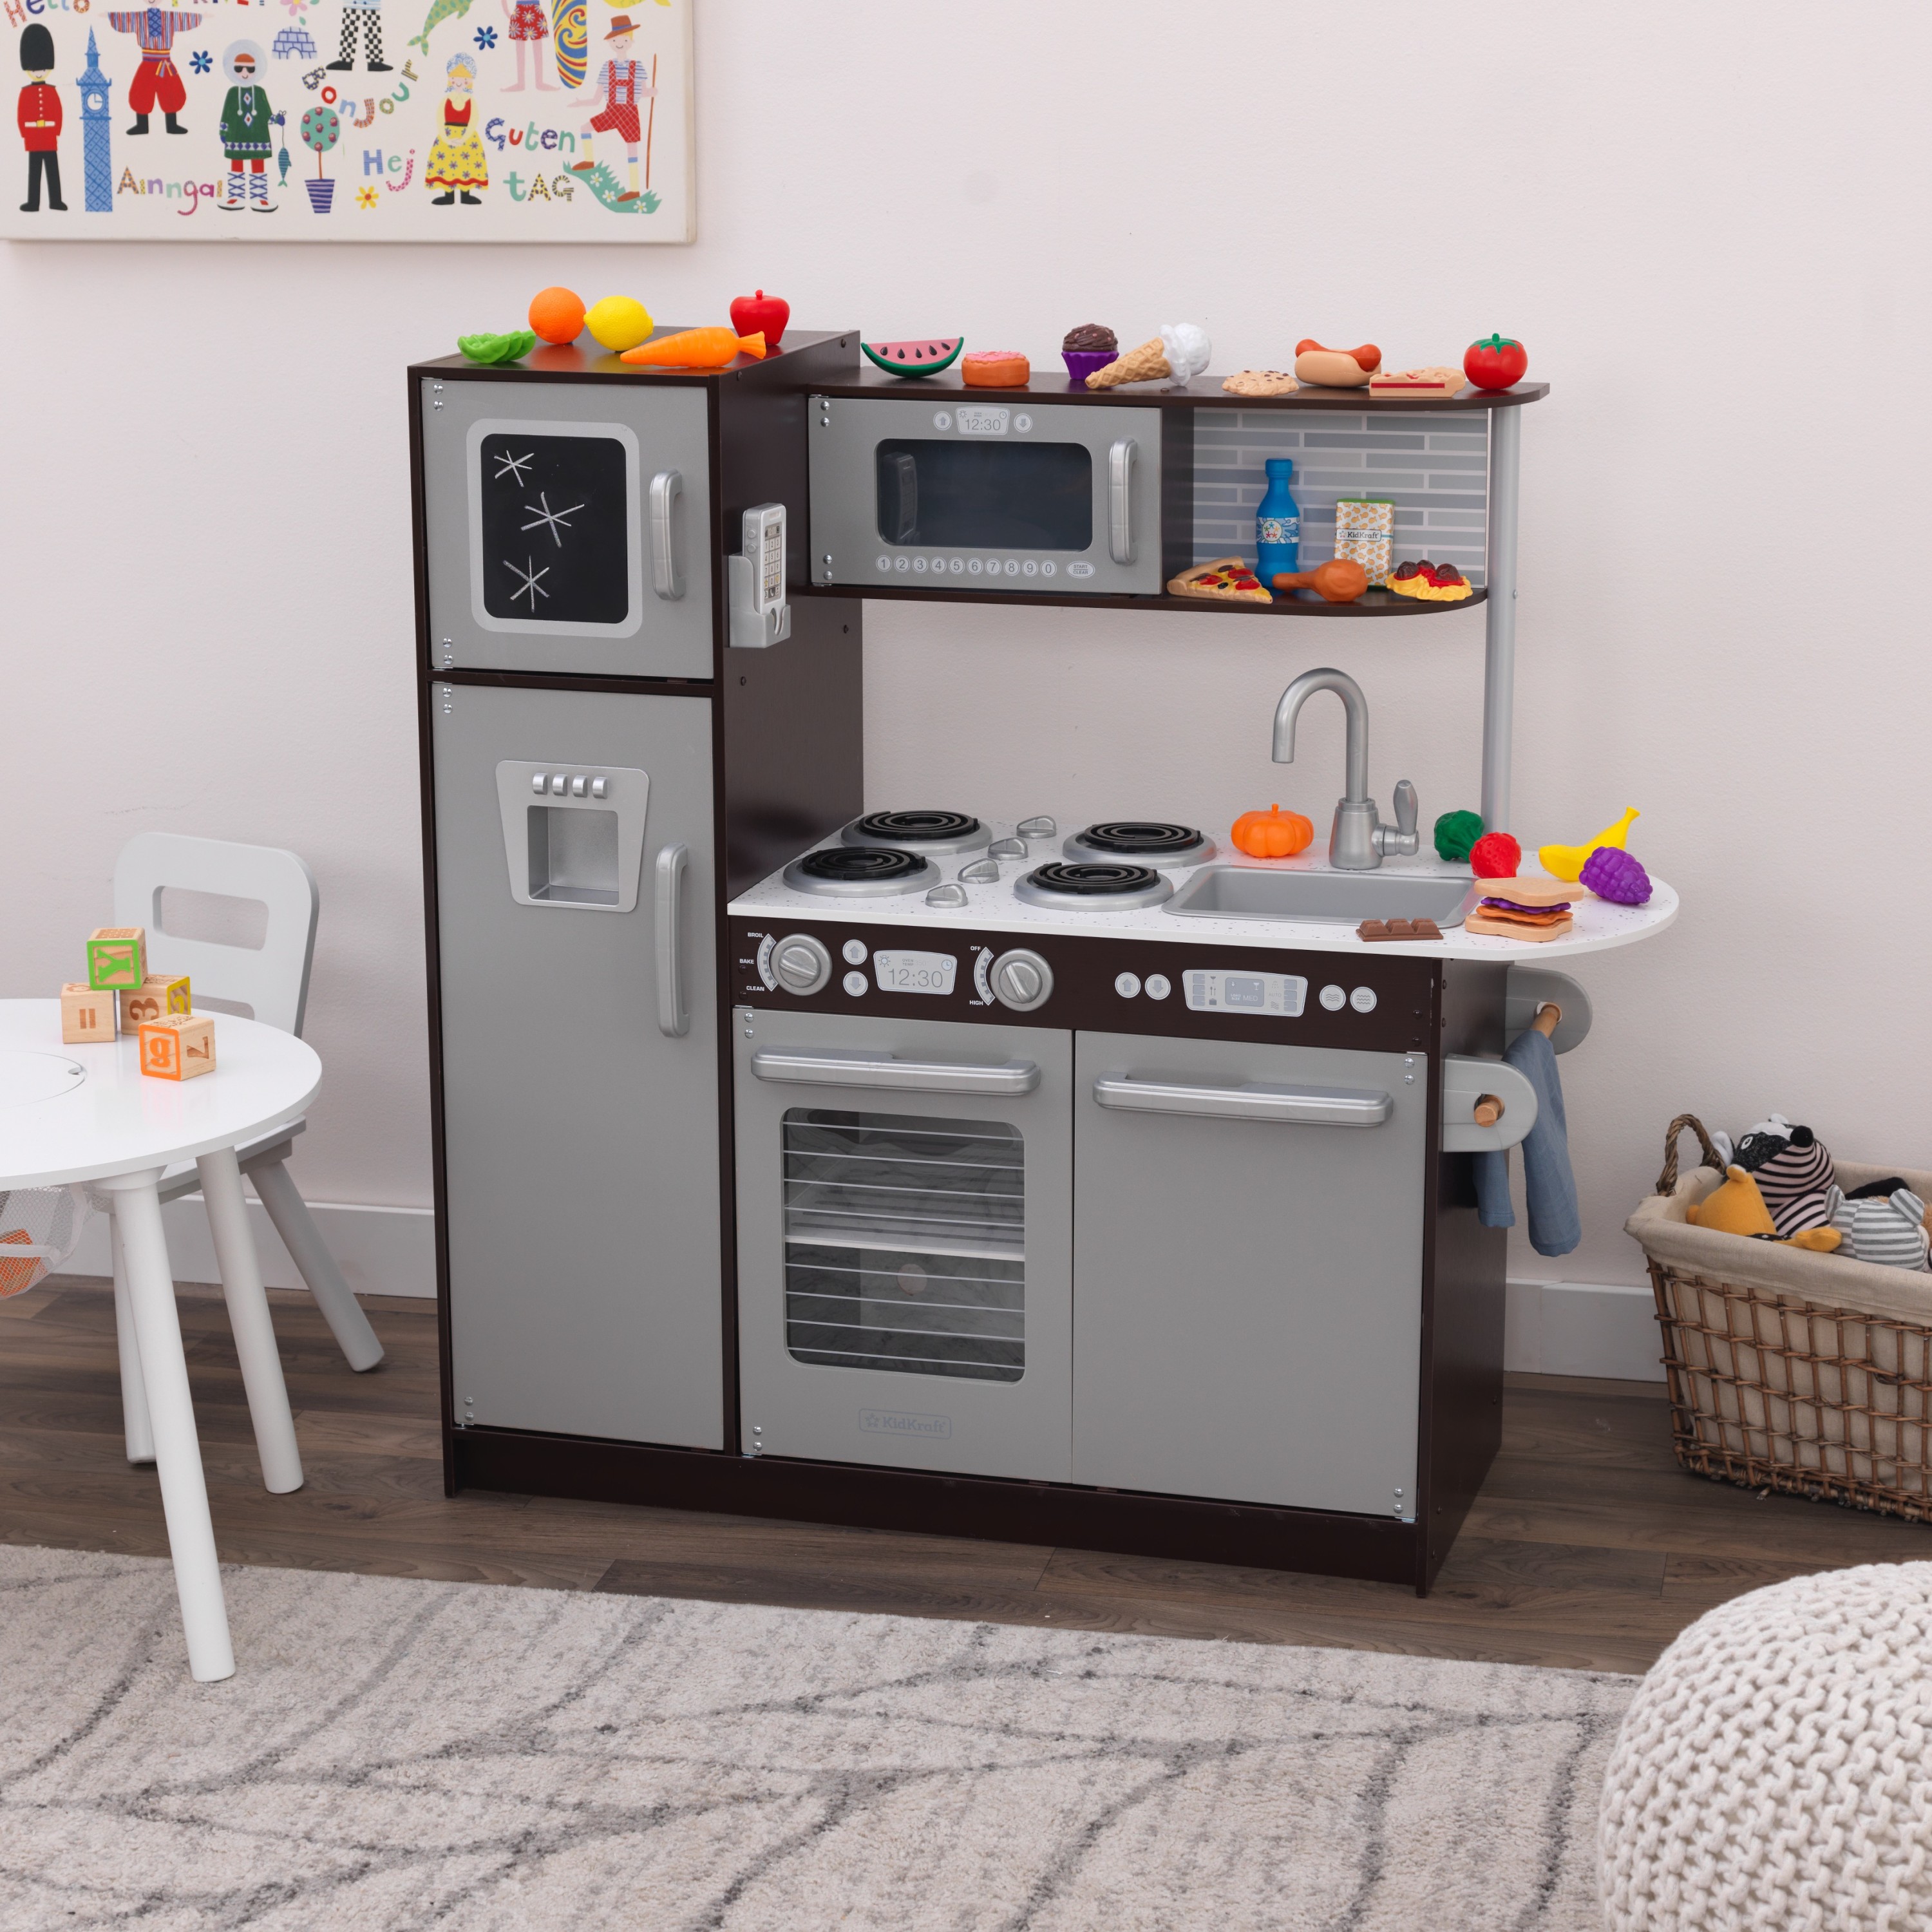 KidKraft Uptown Wooden 30-Piece Play Kitchen for Kids, Black and Silver - image 5 of 14